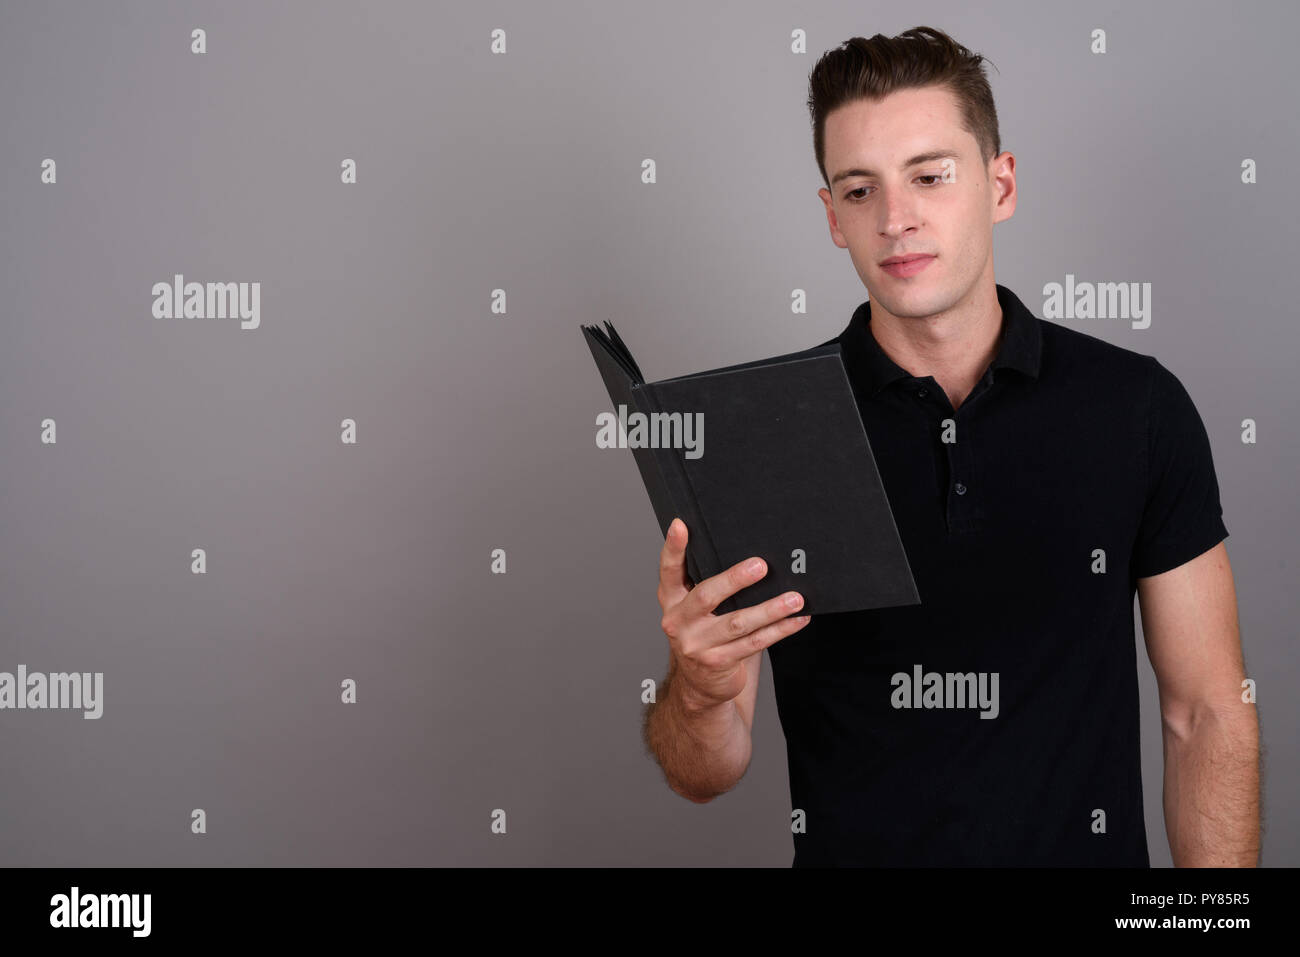 Young handsome man reading book against gray background Stock Photo